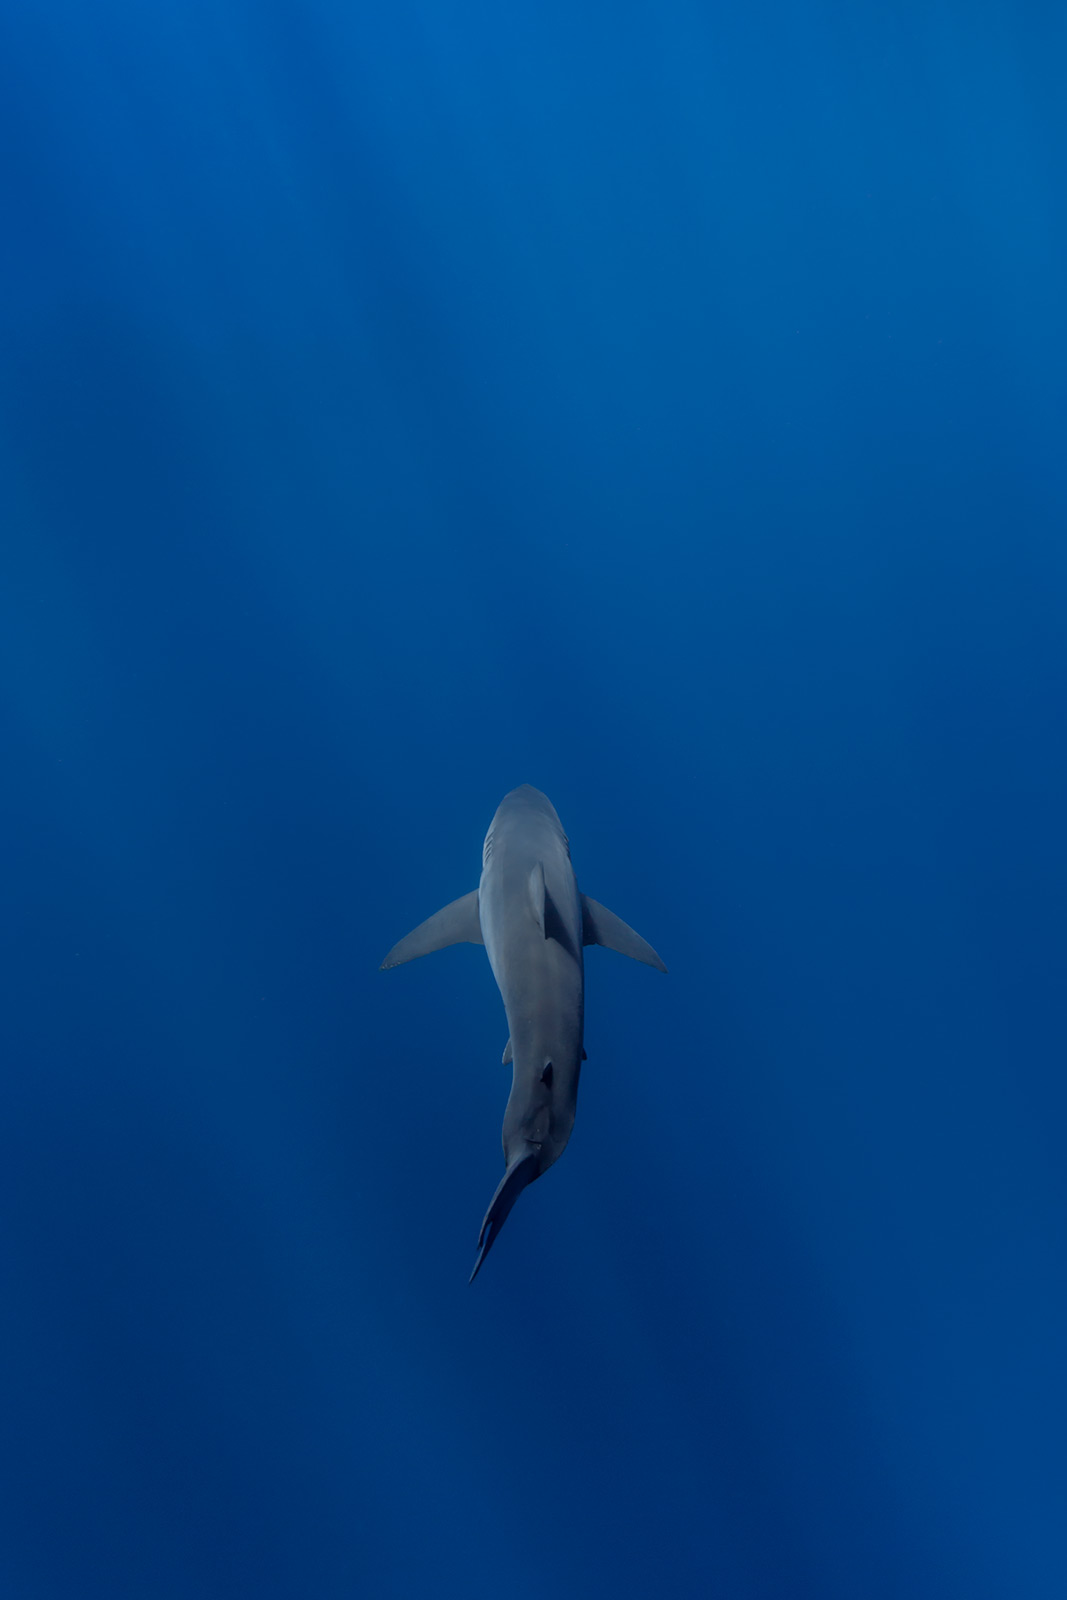 great white shark swims in the deep blue abyss image